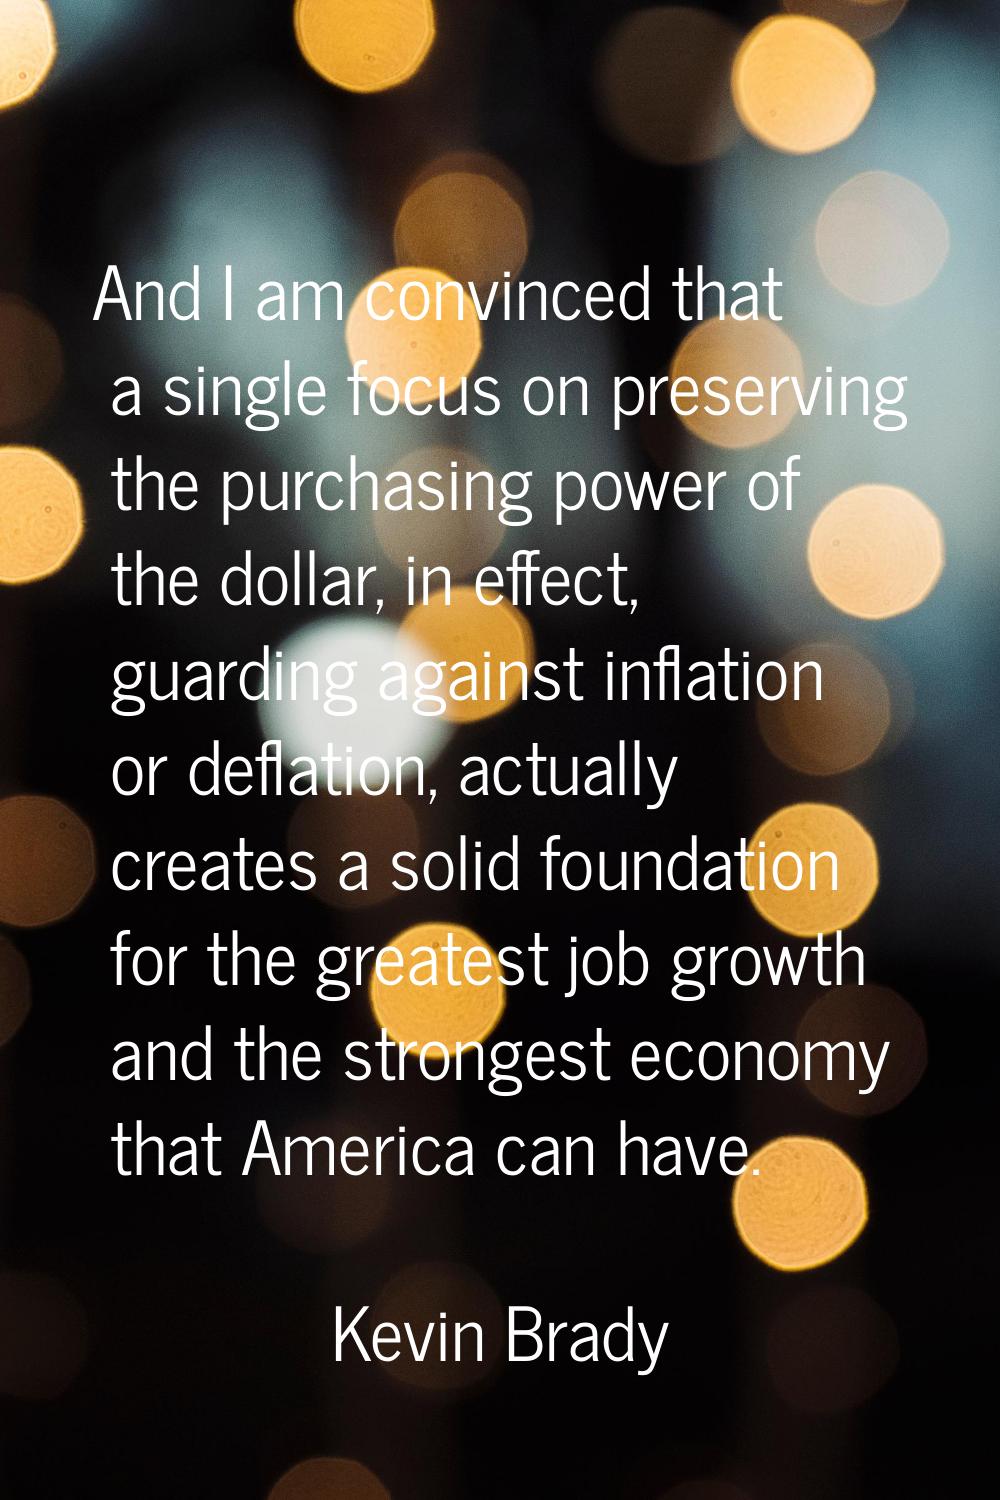 And I am convinced that a single focus on preserving the purchasing power of the dollar, in effect,